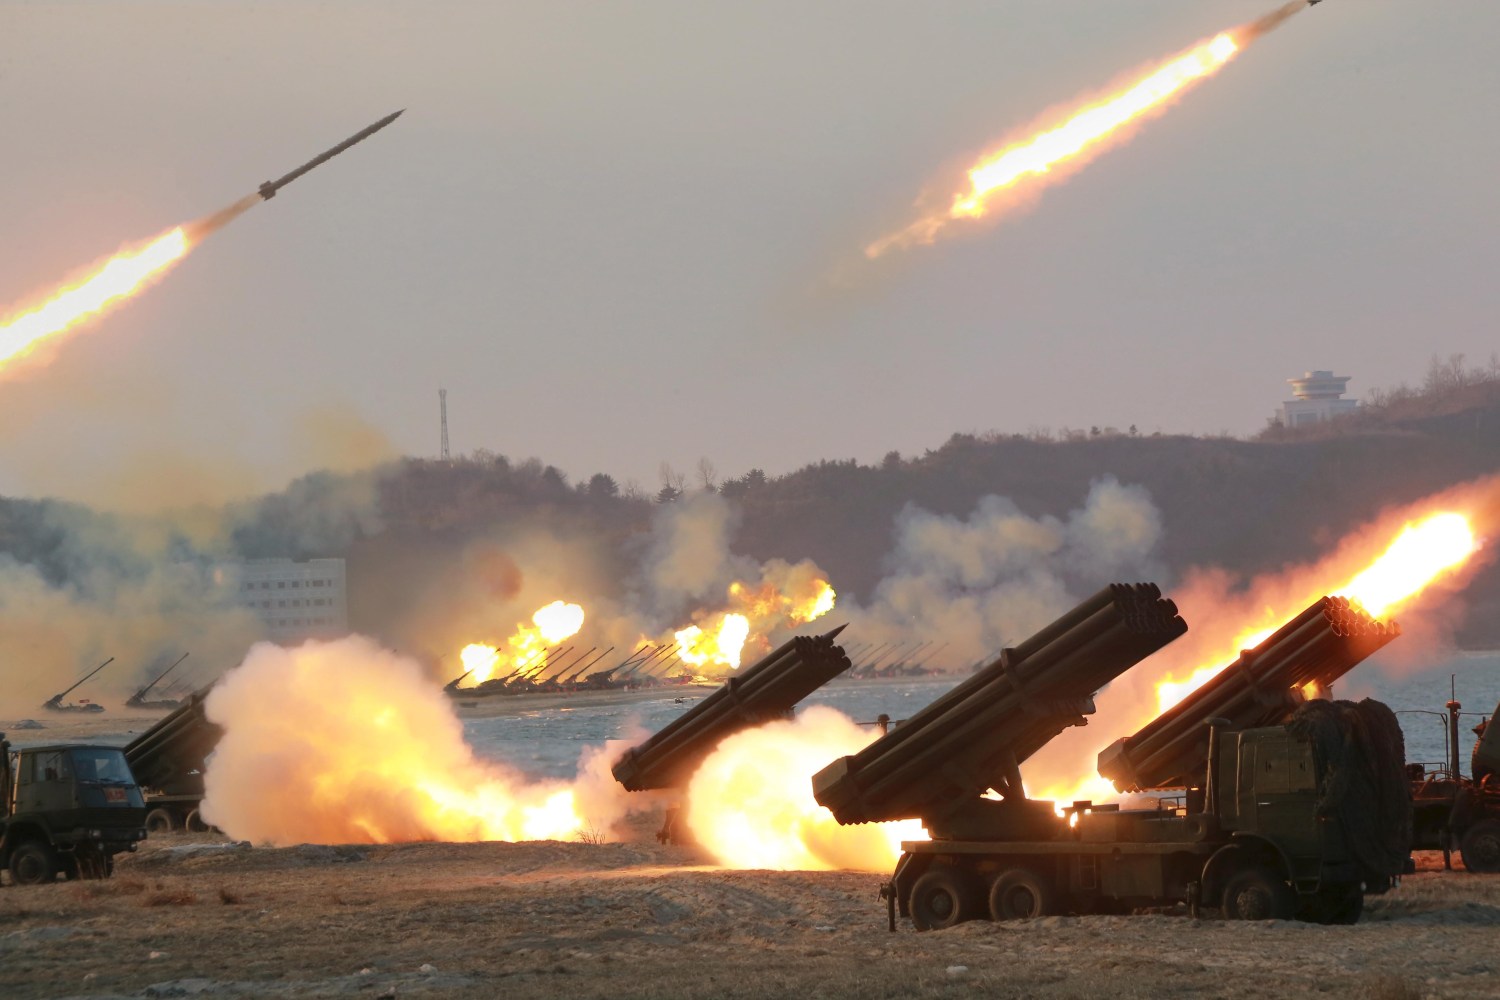 Multiple rocket launchers are seen being fired during a military drill at an unknown location in North Korea.